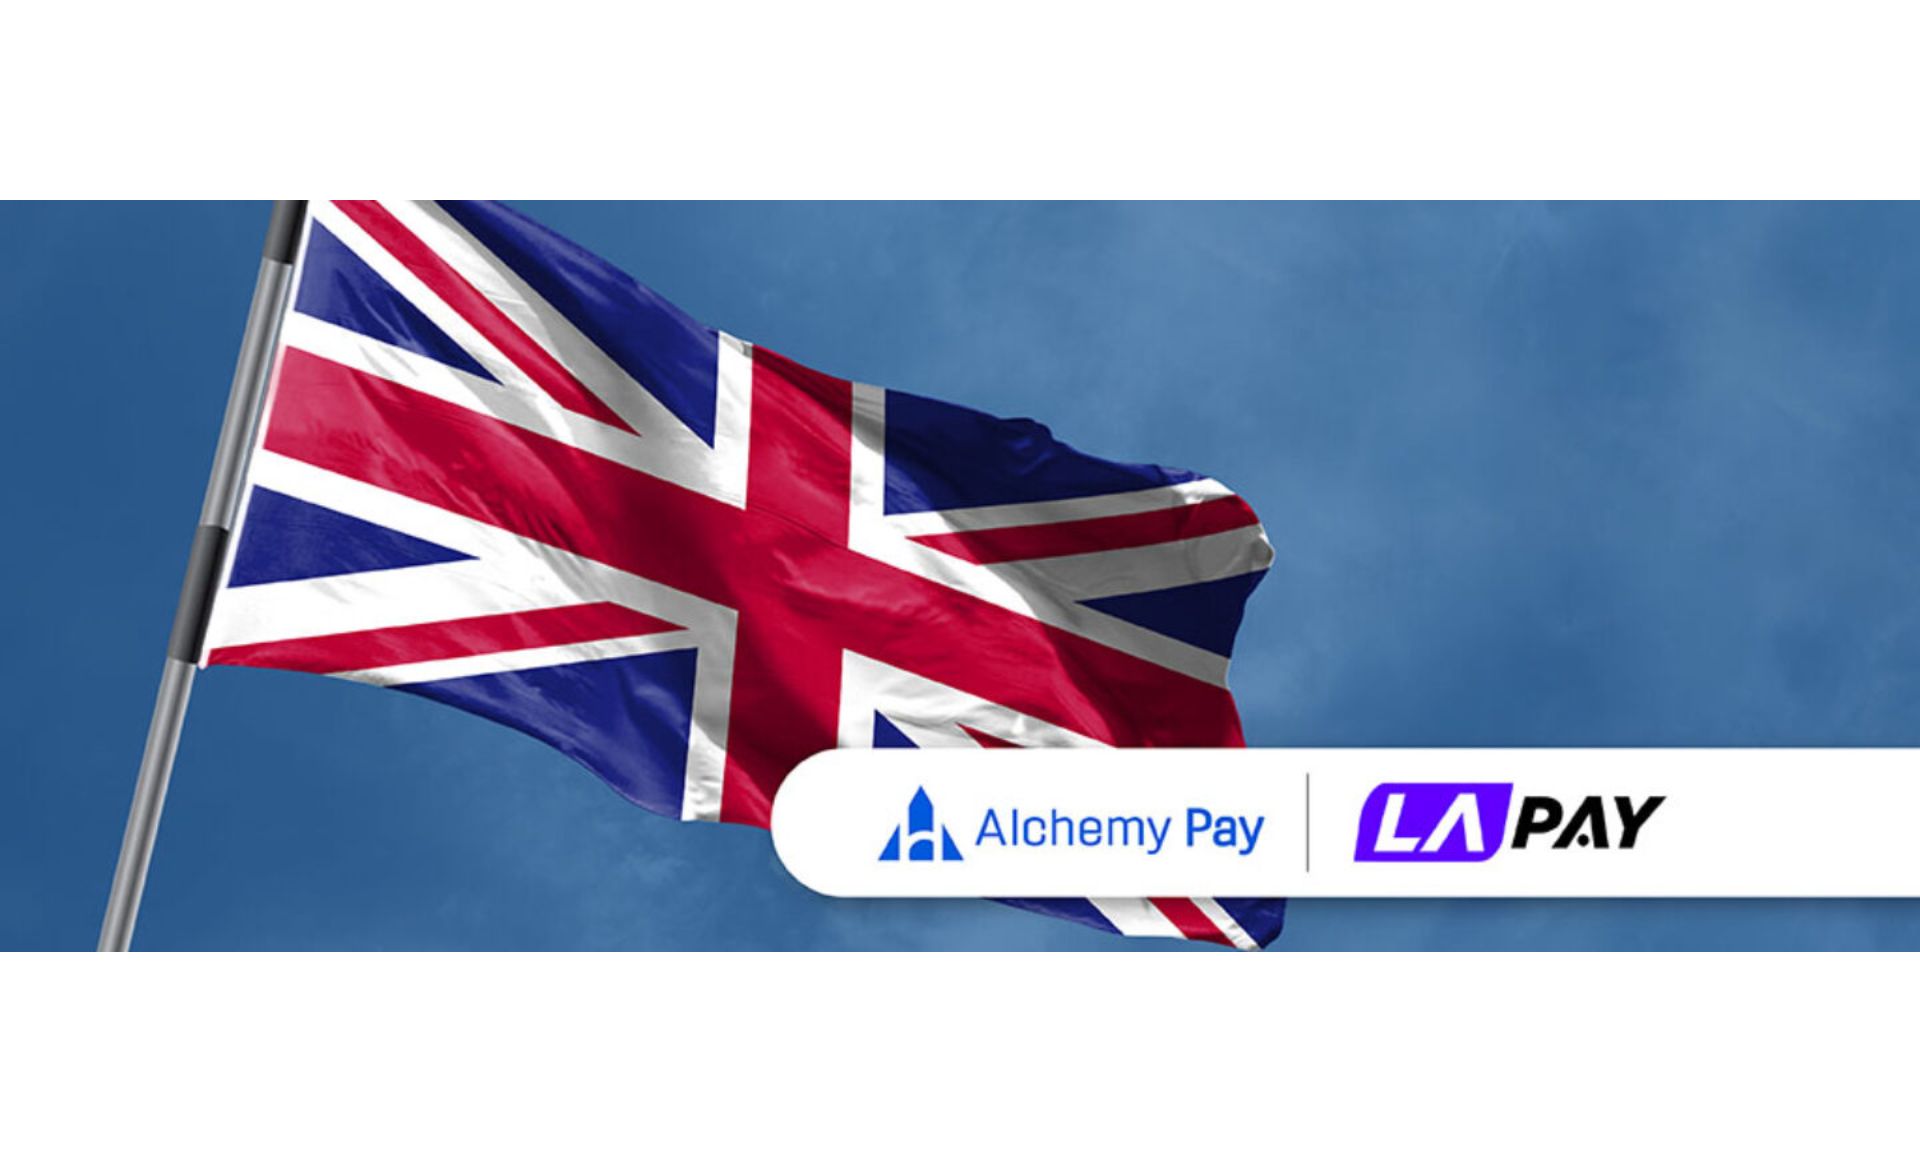 Alchemy Pay Invests in LA Pay 